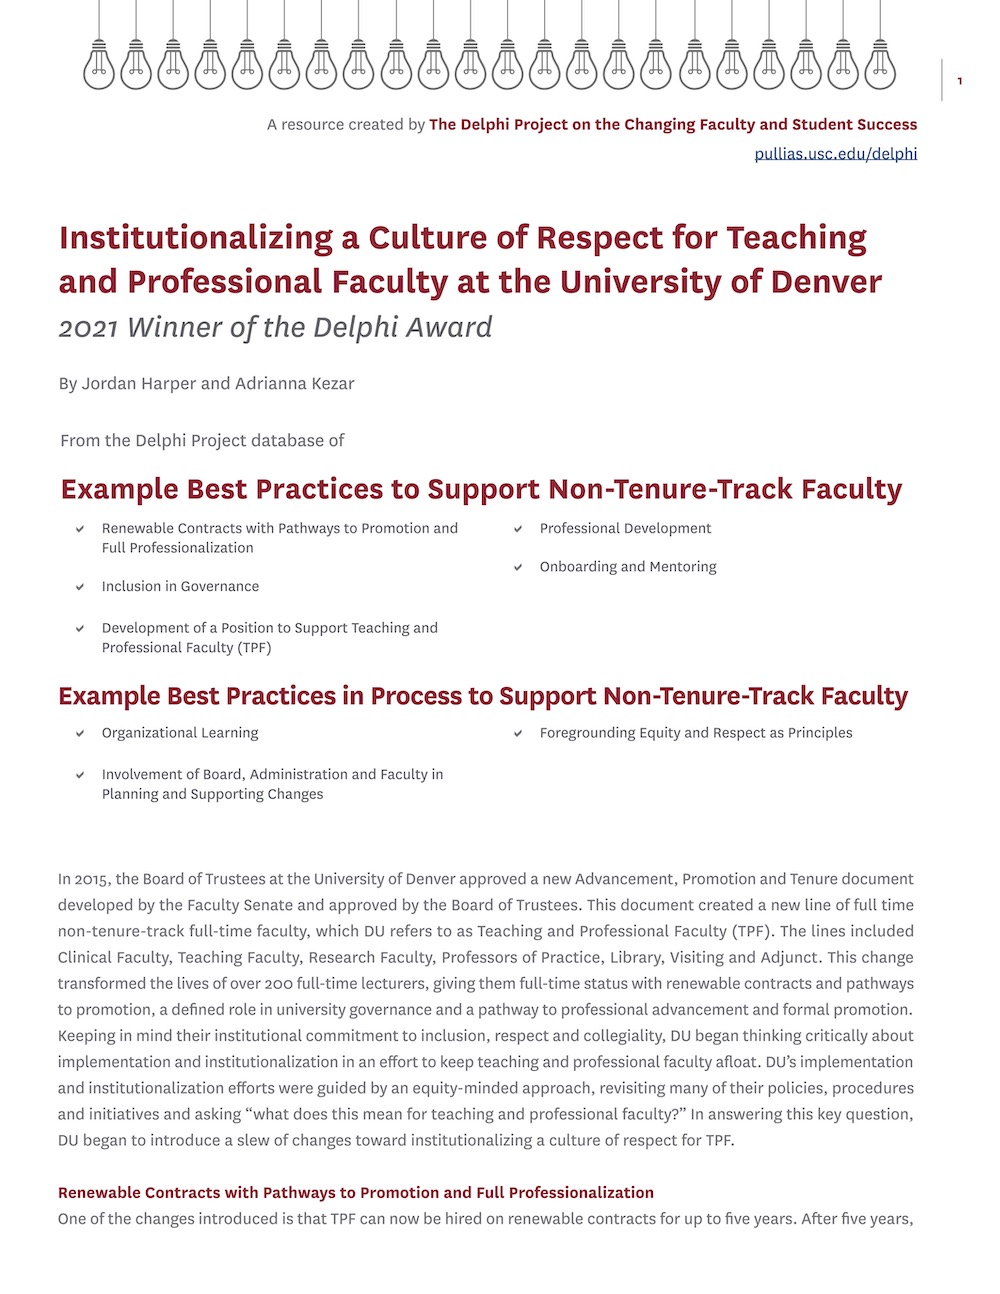 Institutionalizing a Culture of Respect for Teaching and Professional Faculty at the University of Denver